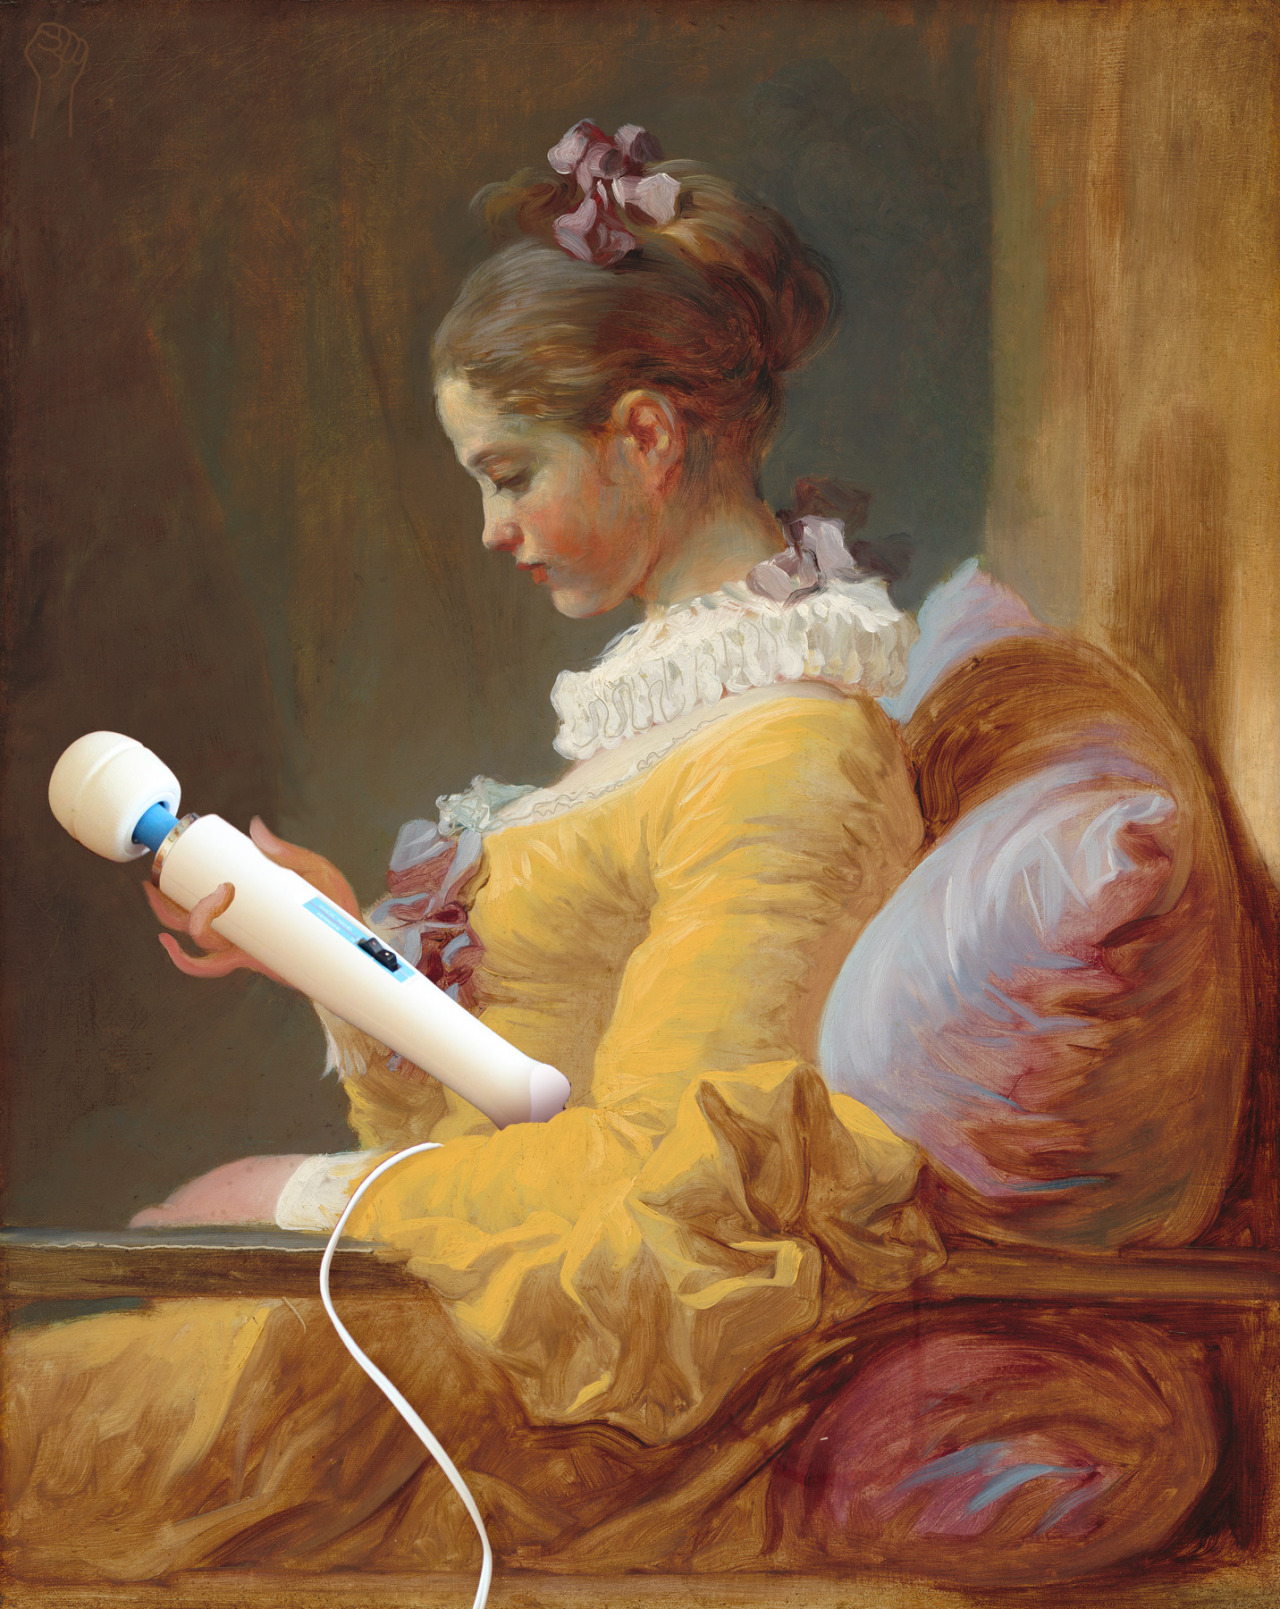 Young Girl Contemplating Magic Wand by Jean-Honore Fragonard.